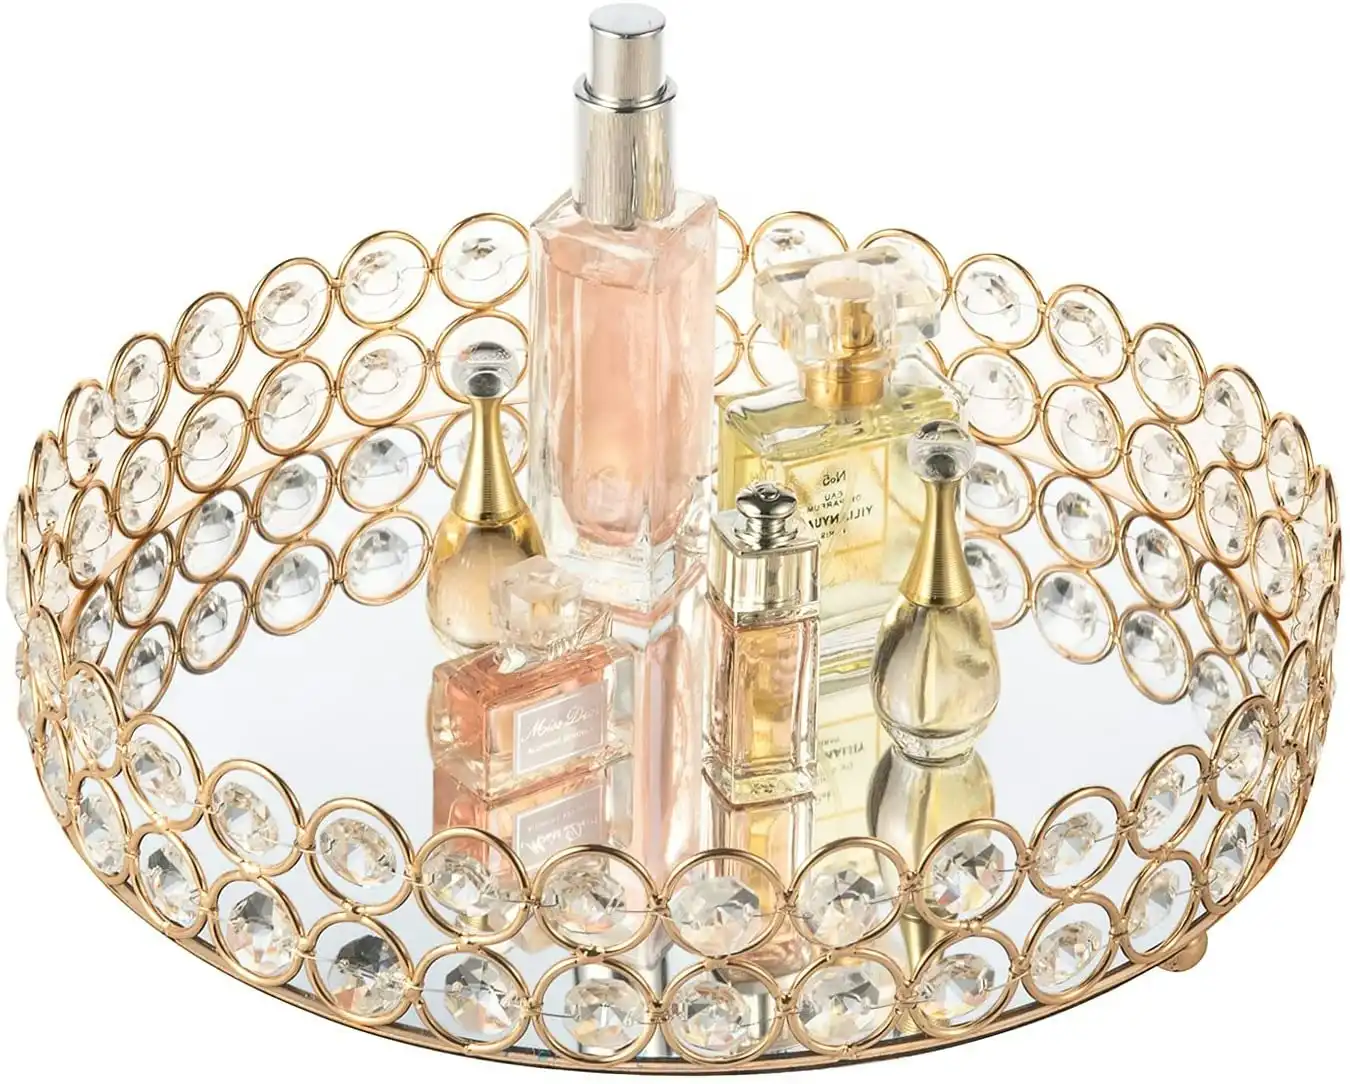 Crystal Beads Cosmetic Round Tray Jewelry Organizer (Gold)